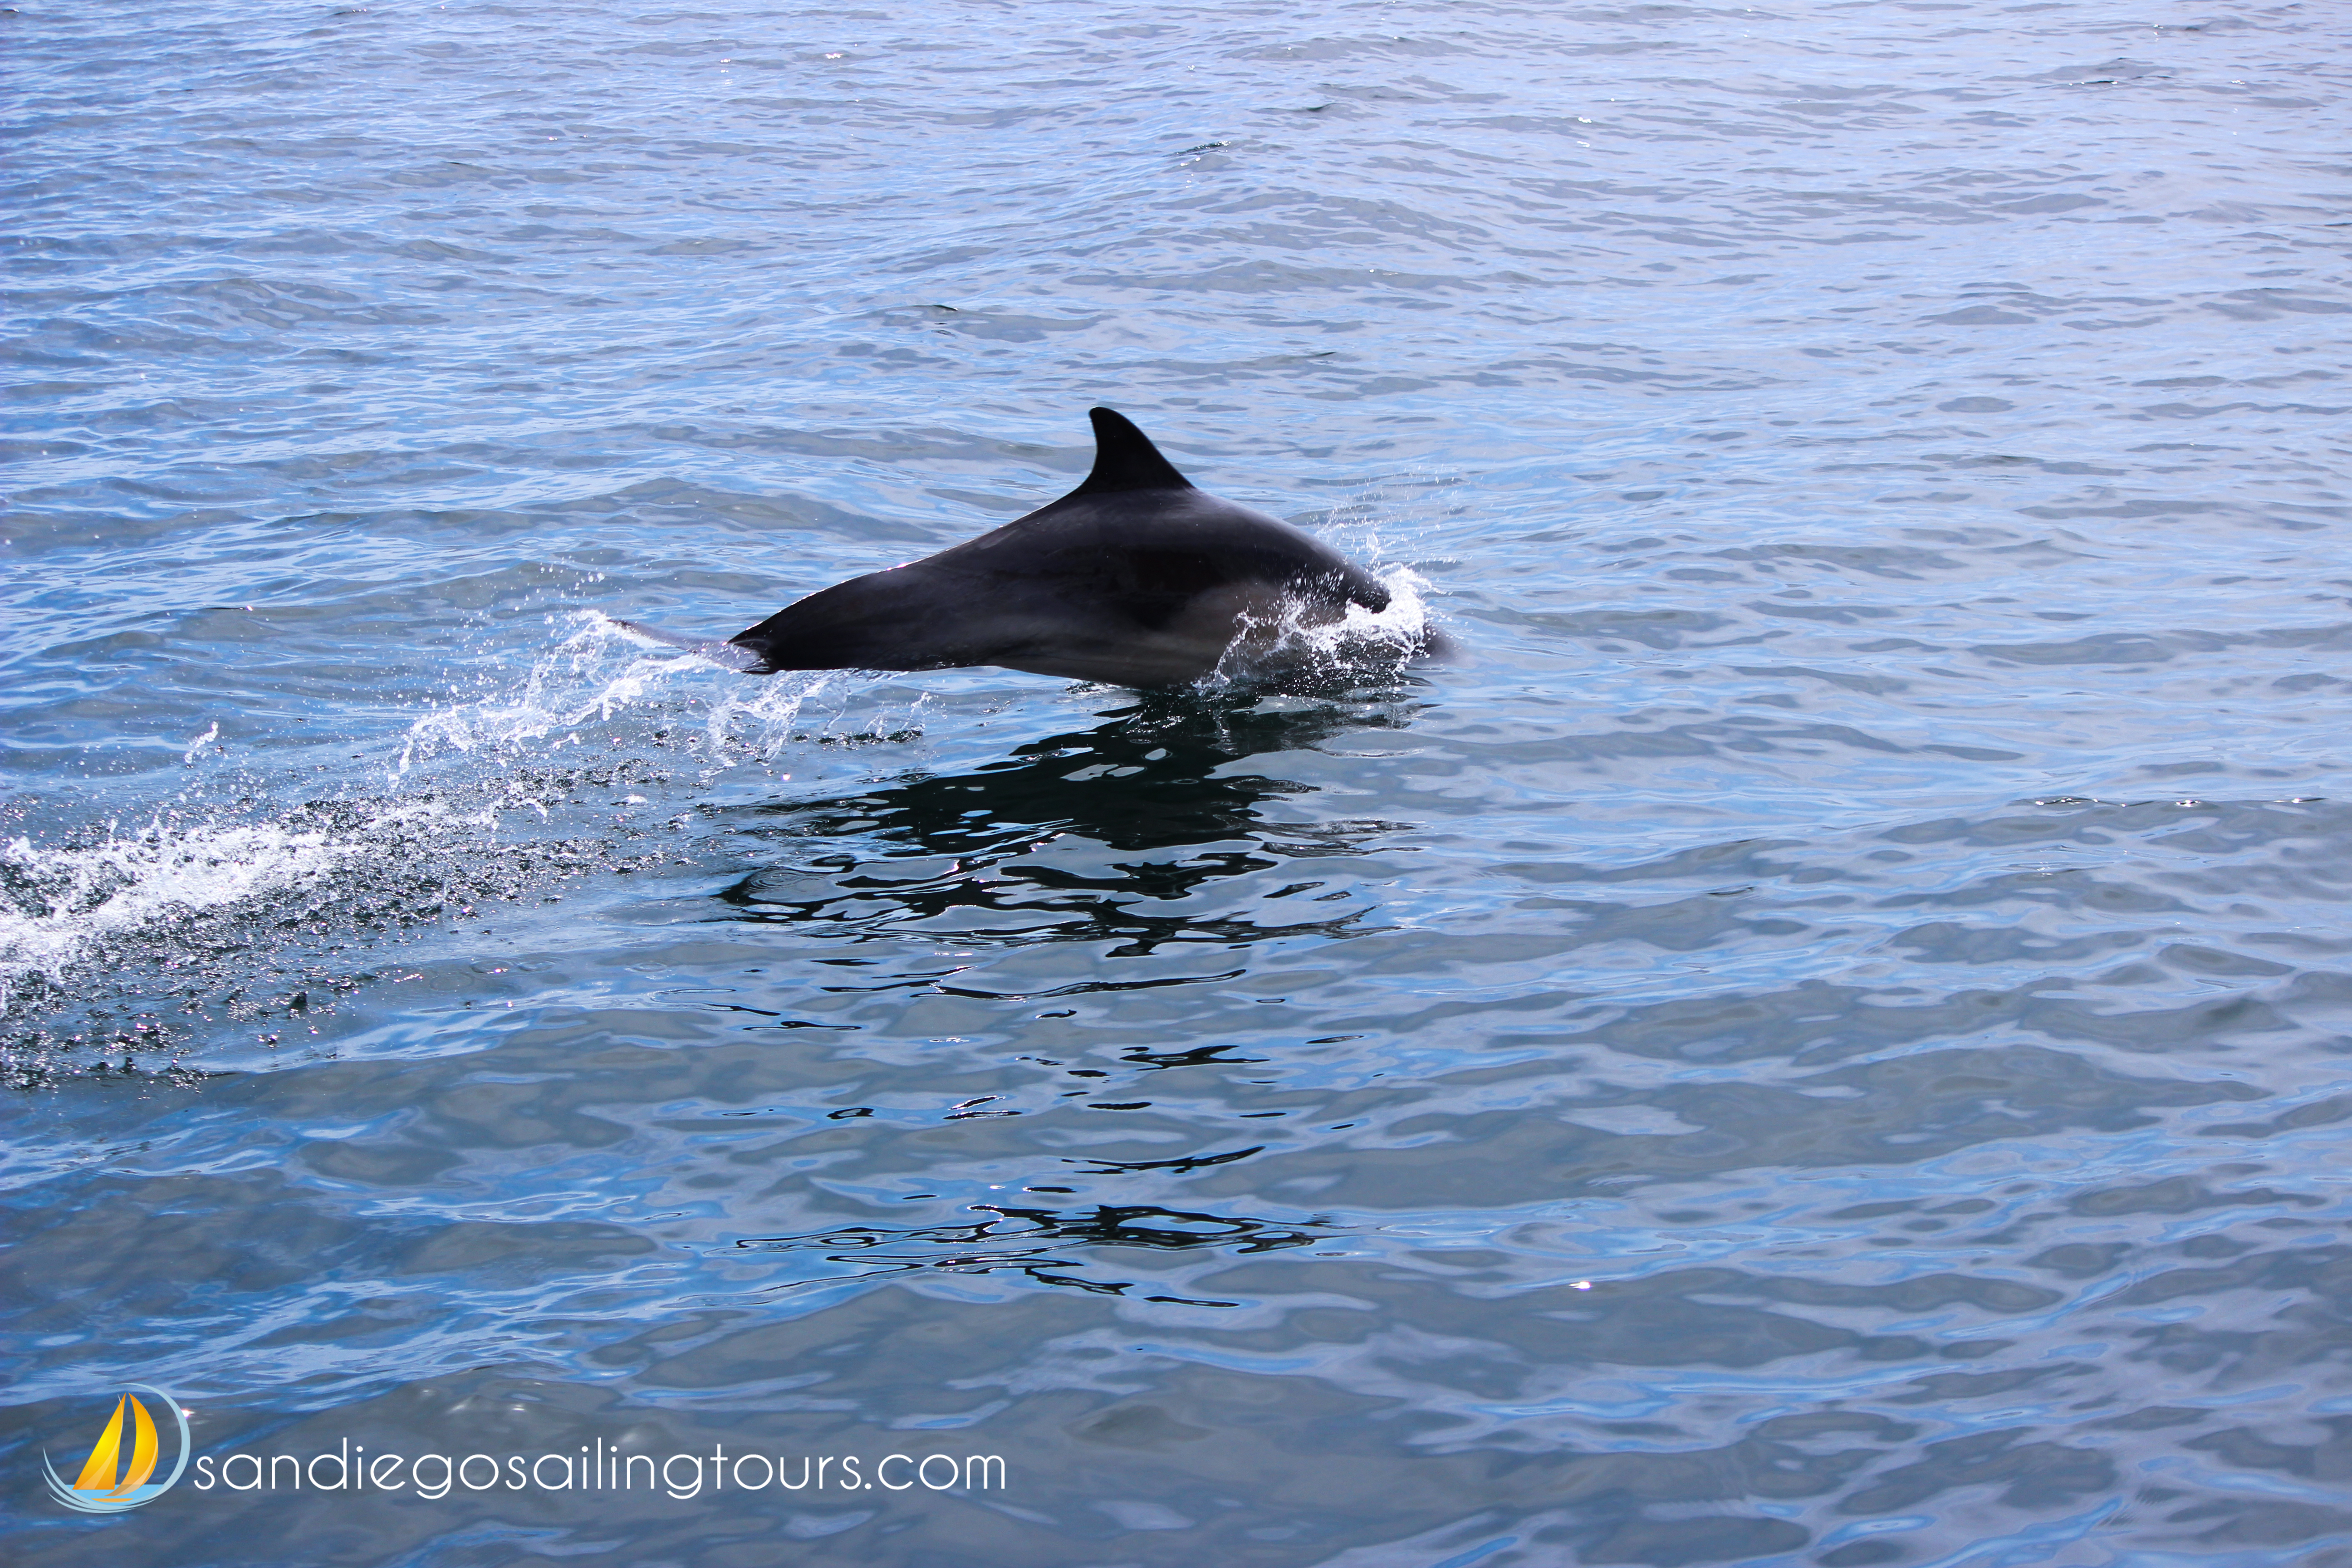 DOLPHIN JUMPING IN SAN DIEGO BAY